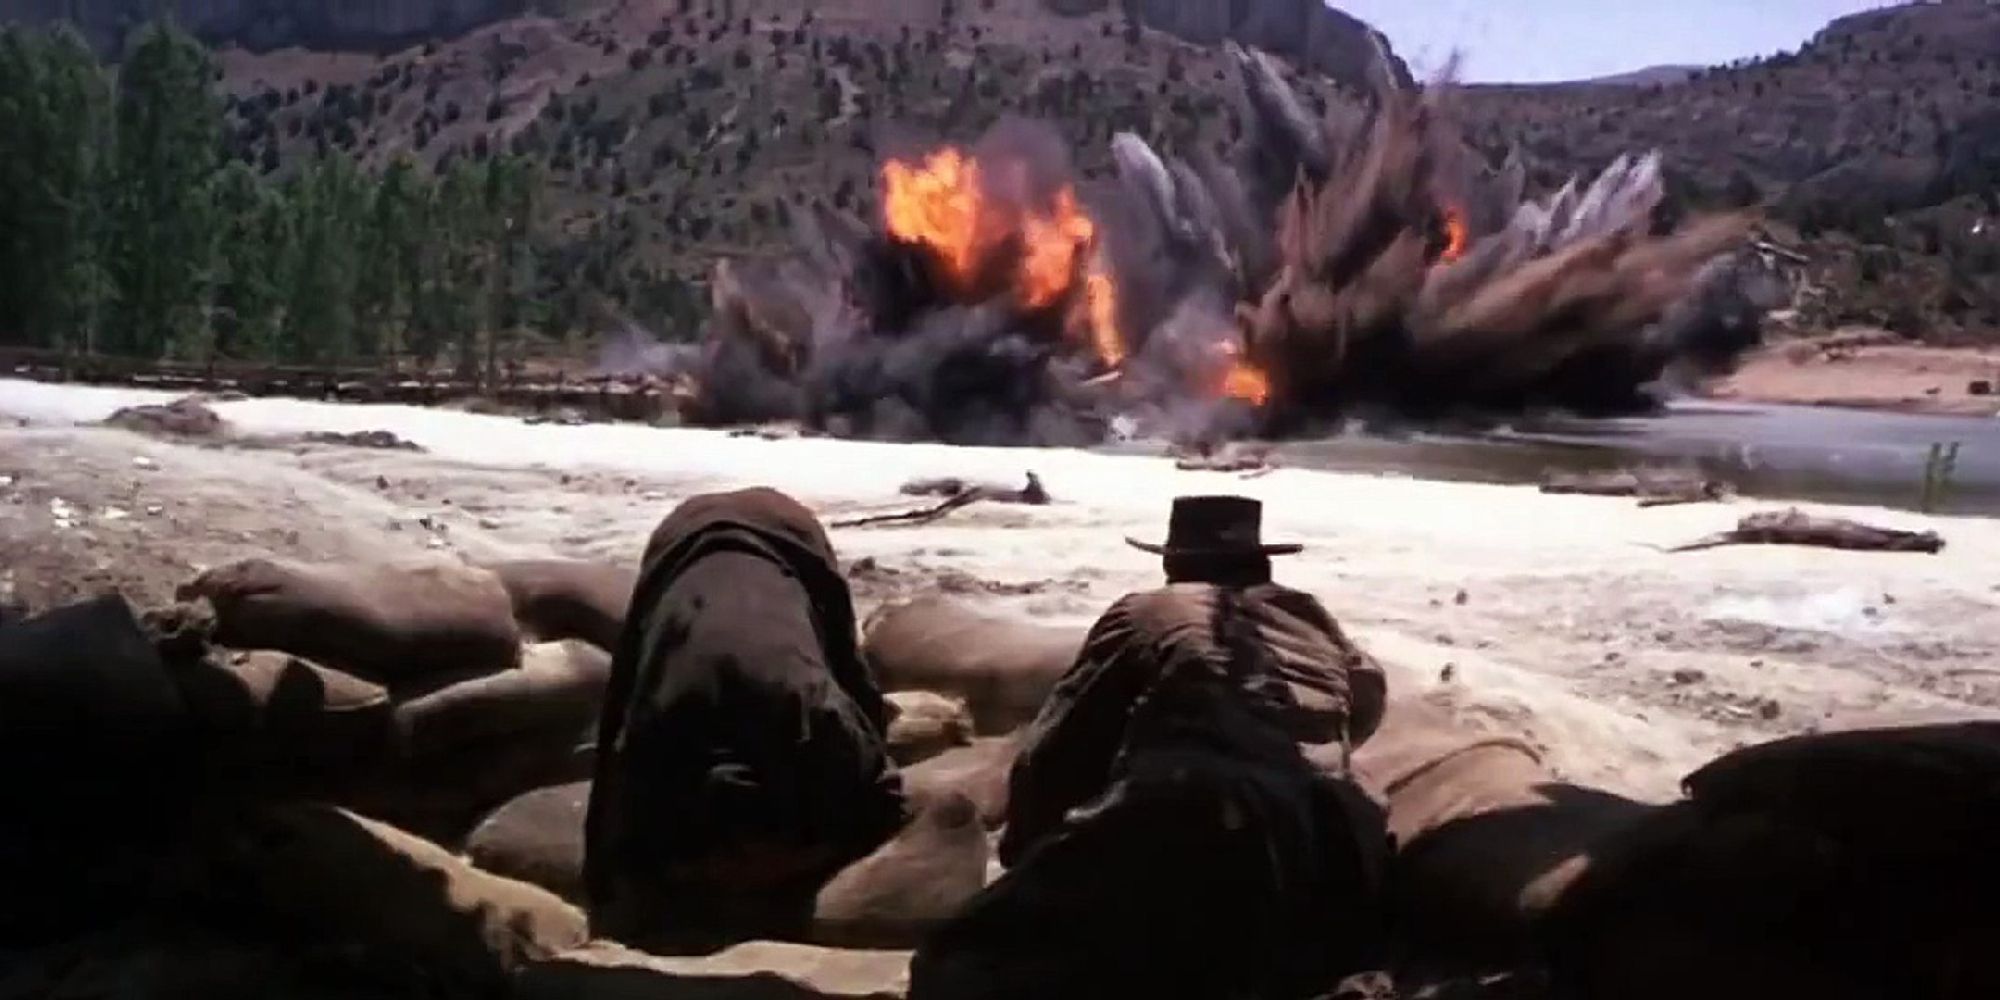 Bridge explosion from The Good, the Bad, and the Ugly - 1966 (1)